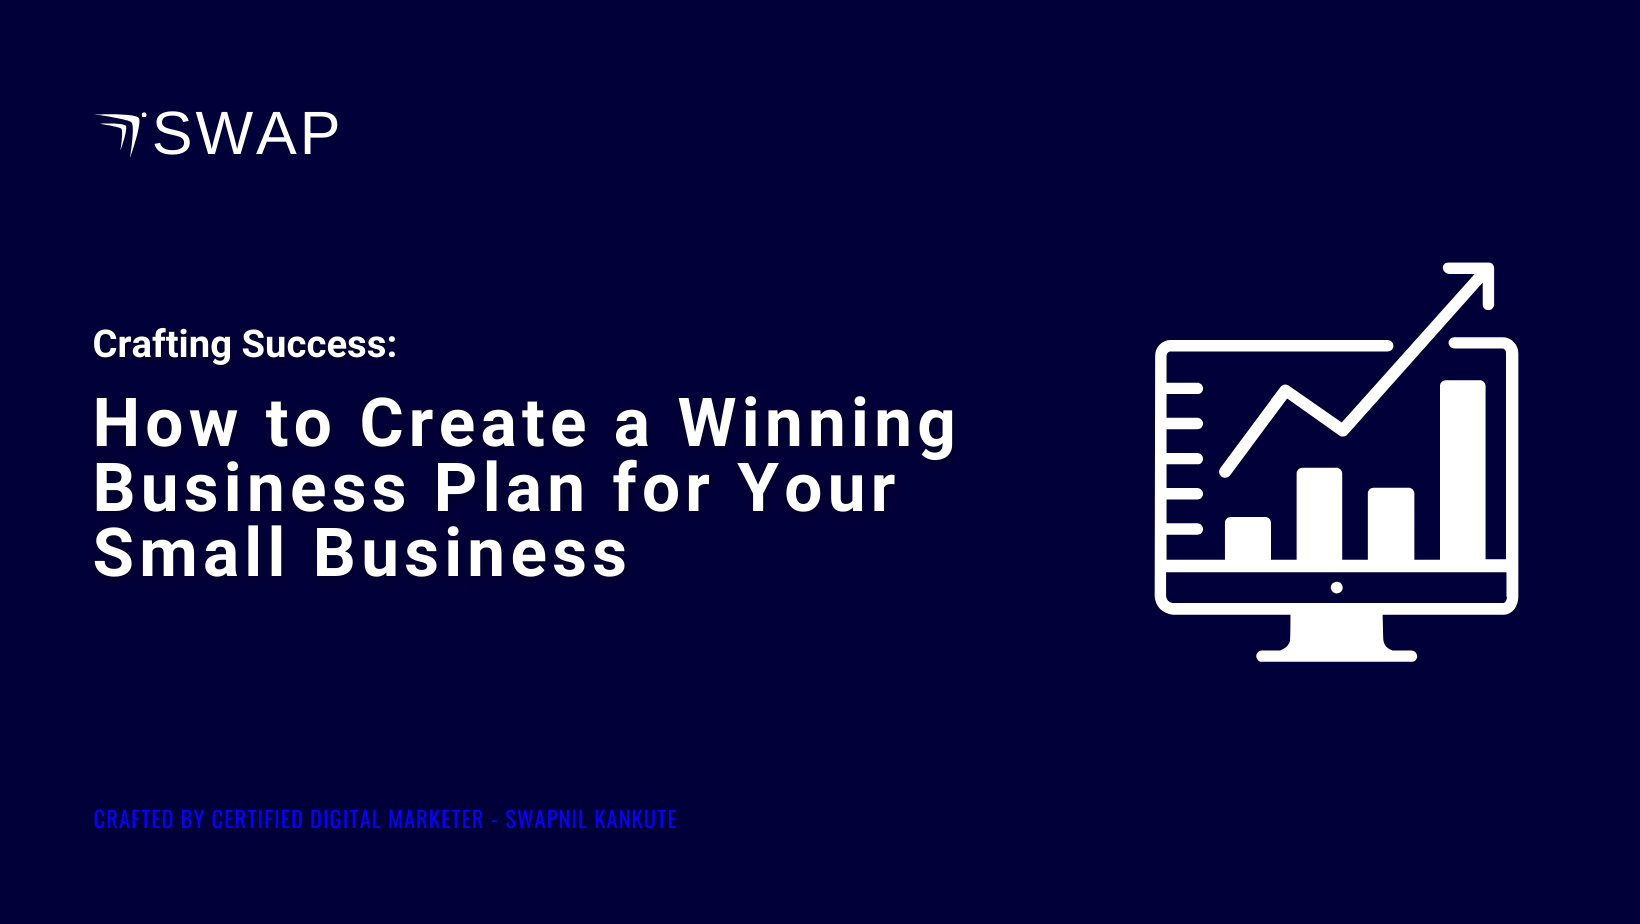 Crafting Success: How to Create a Winning Business Plan for Your Small Business